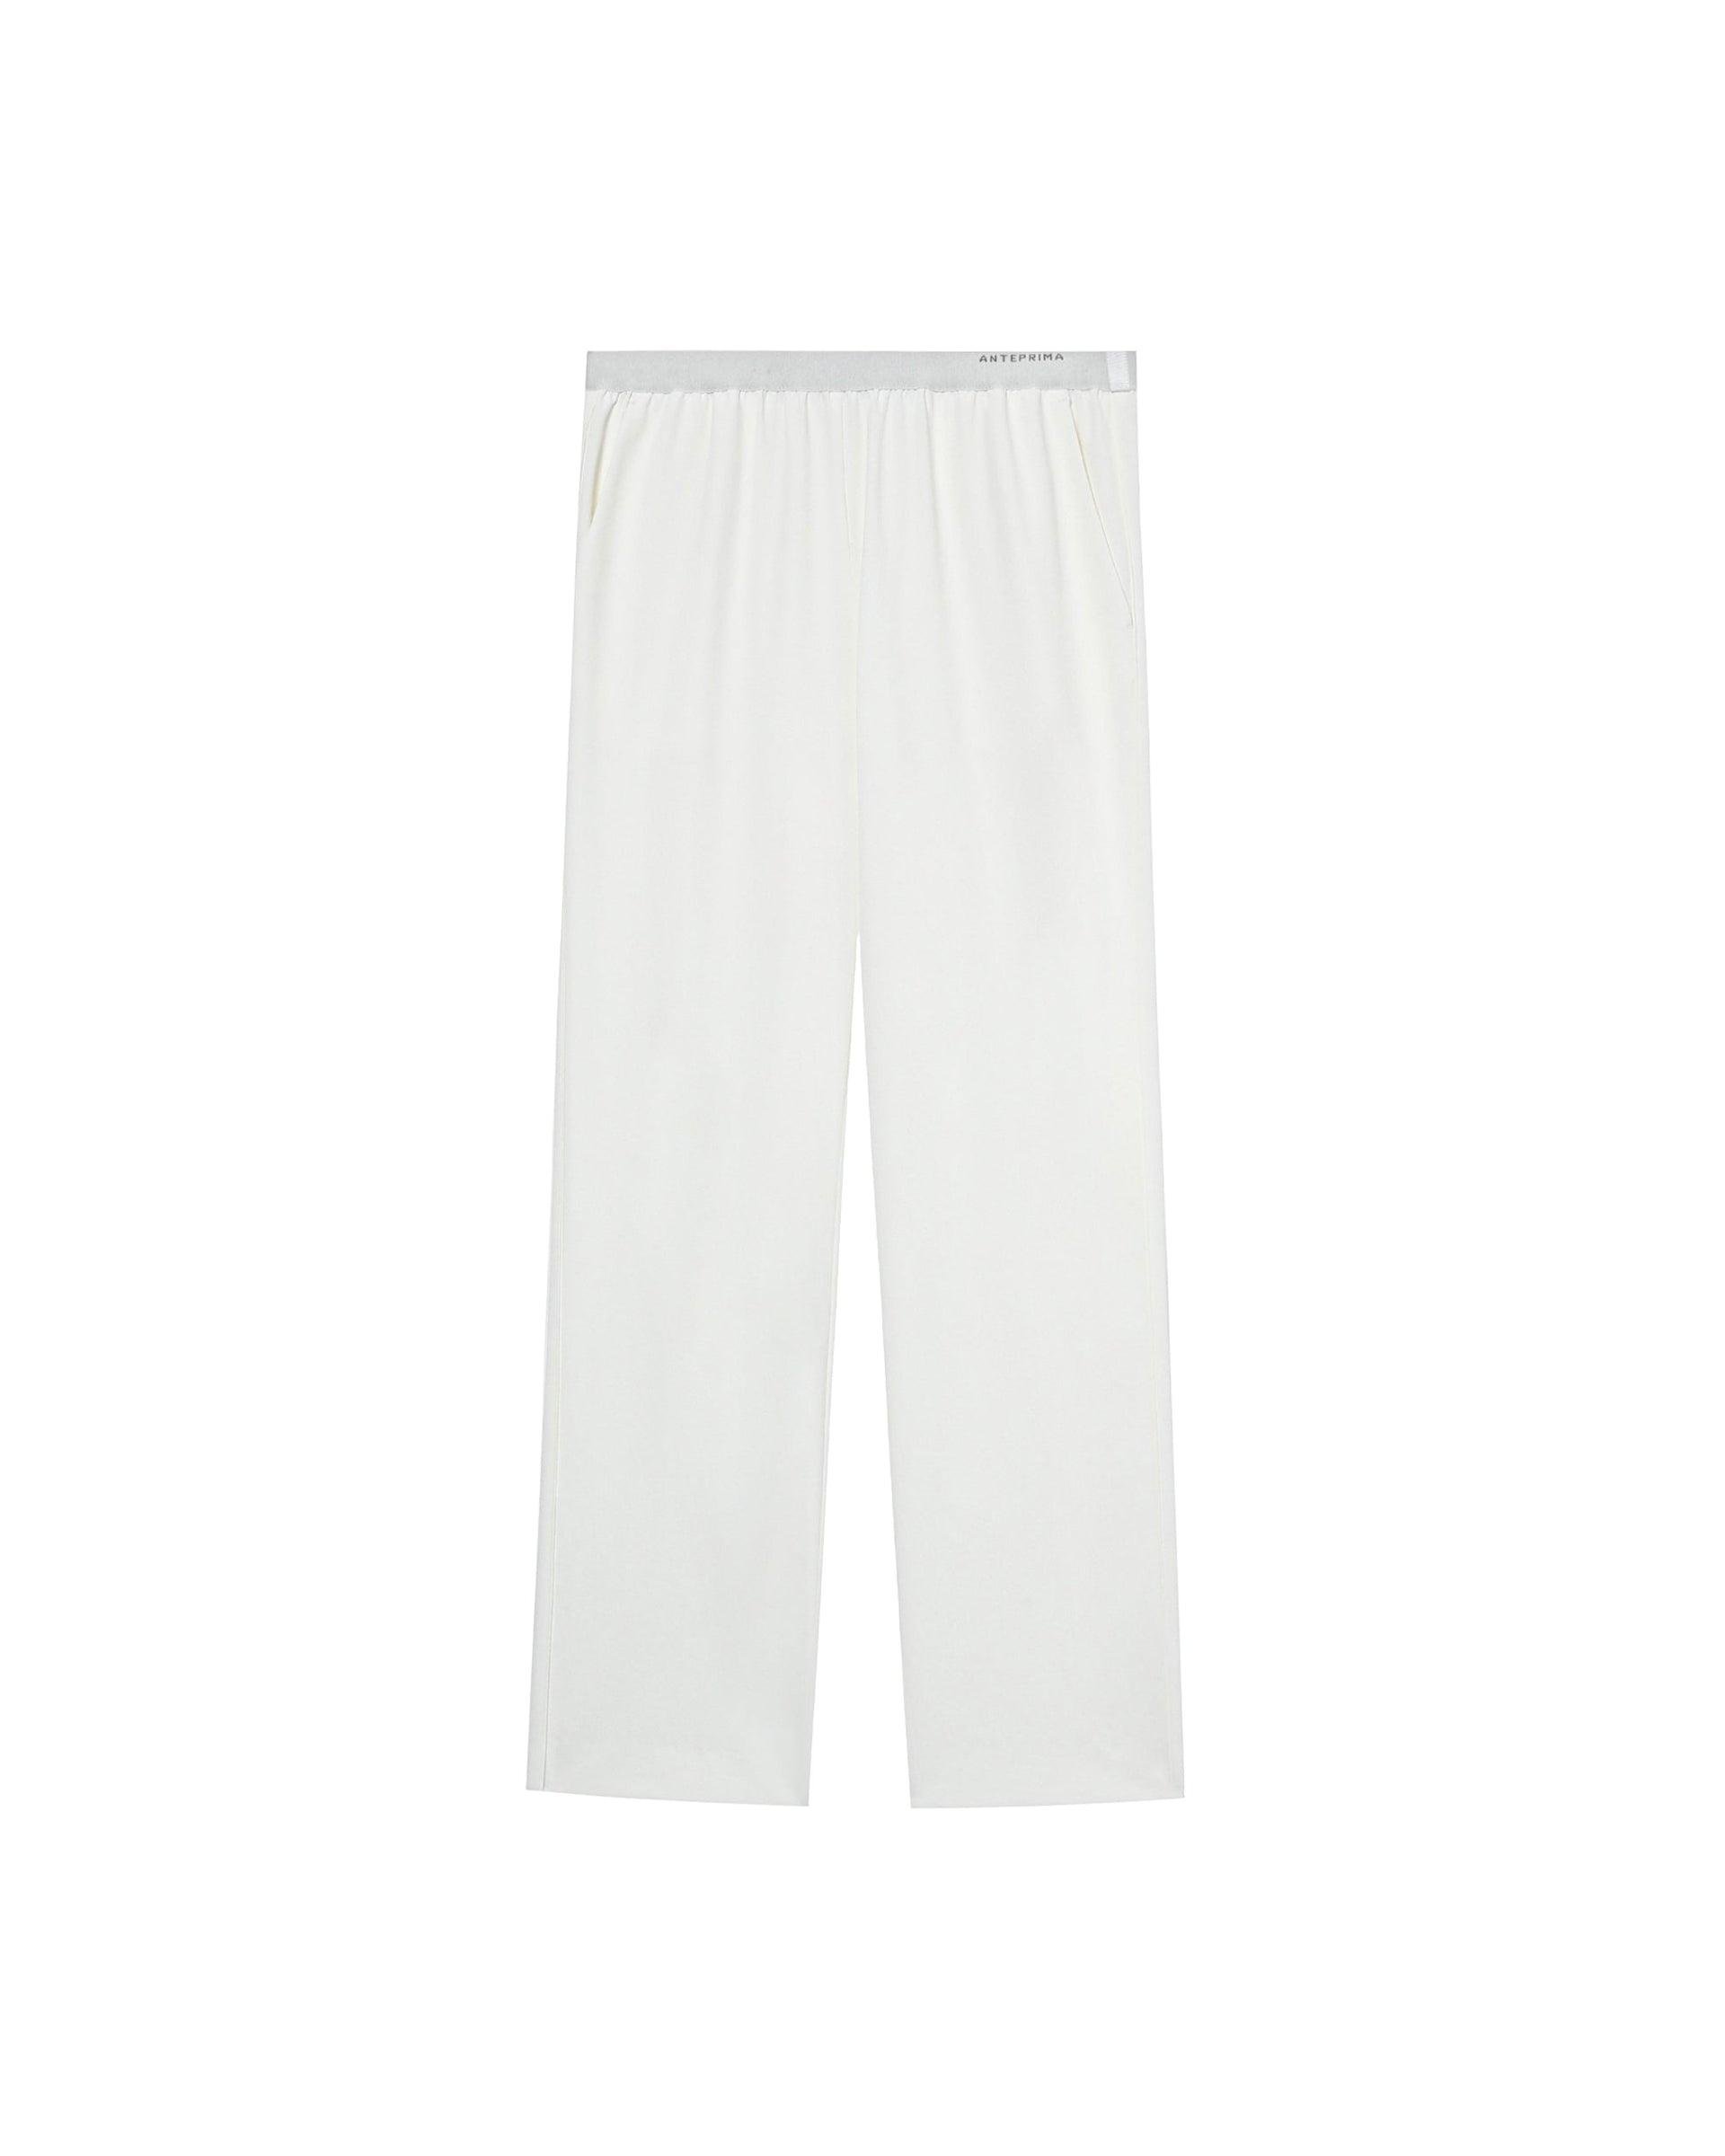 New Leisure Pants by ANTEPRIMA